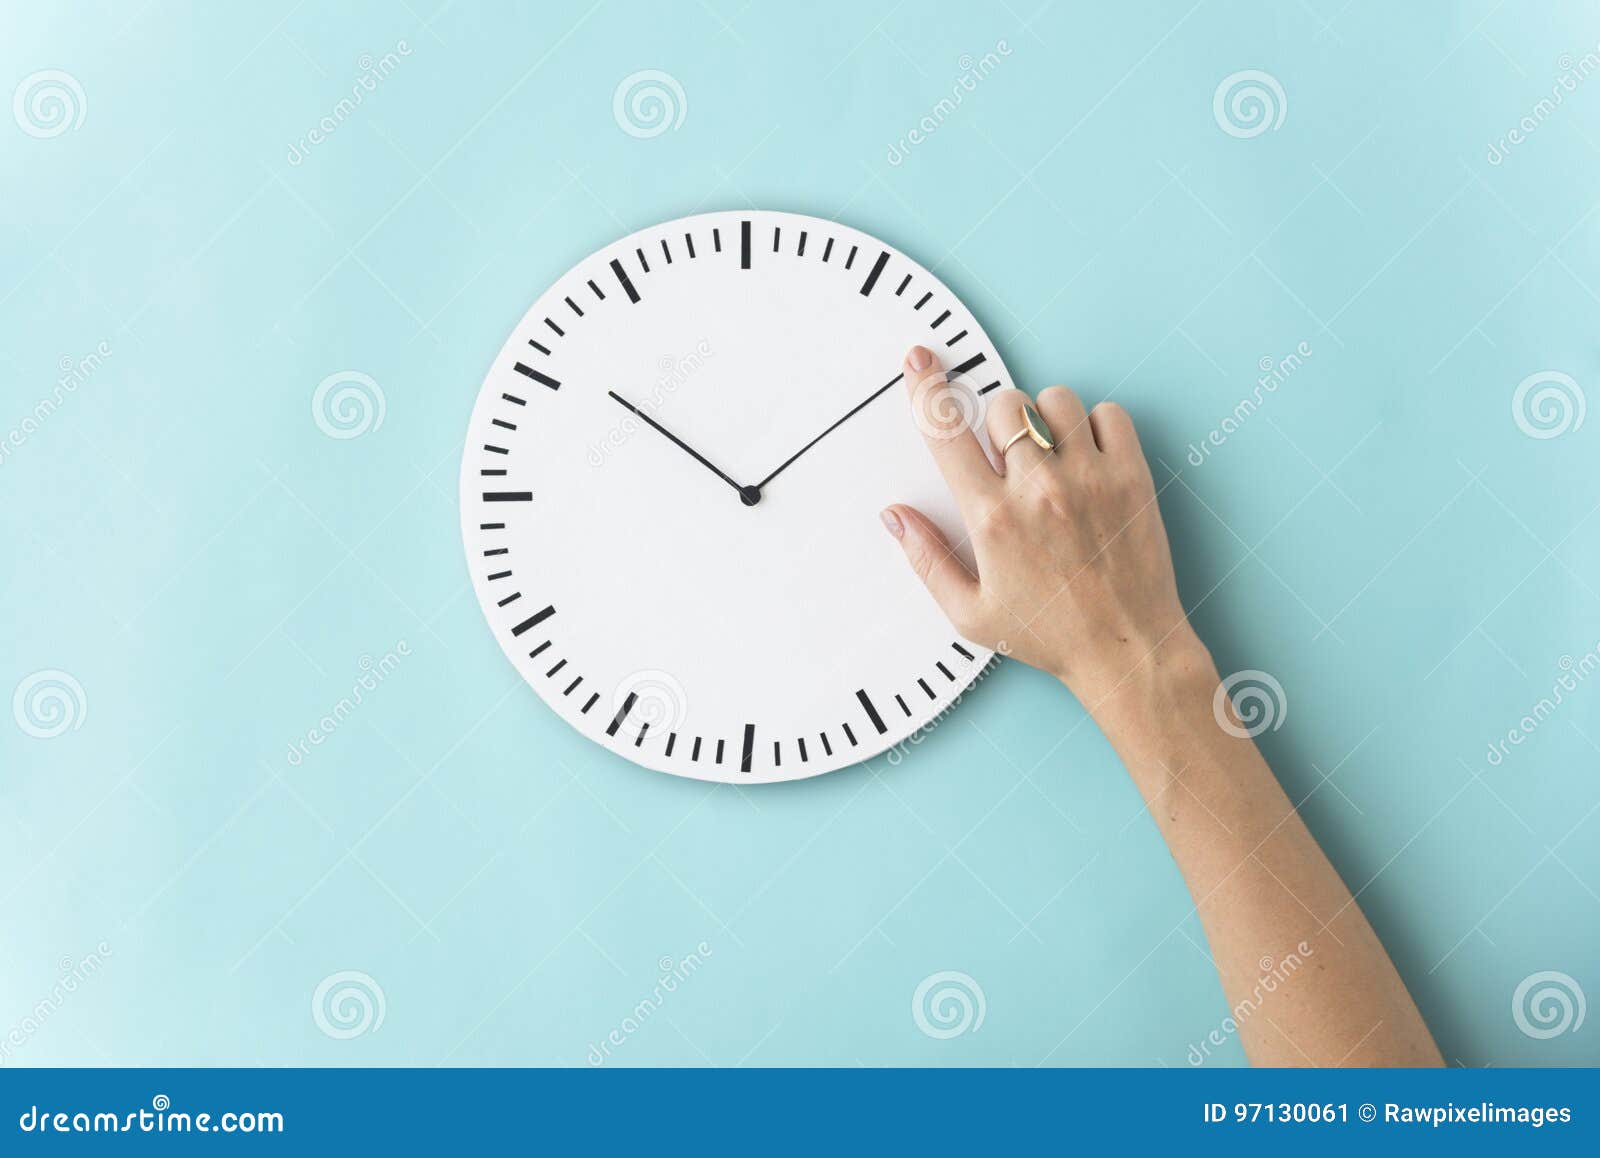 time punctual second minute hour concept